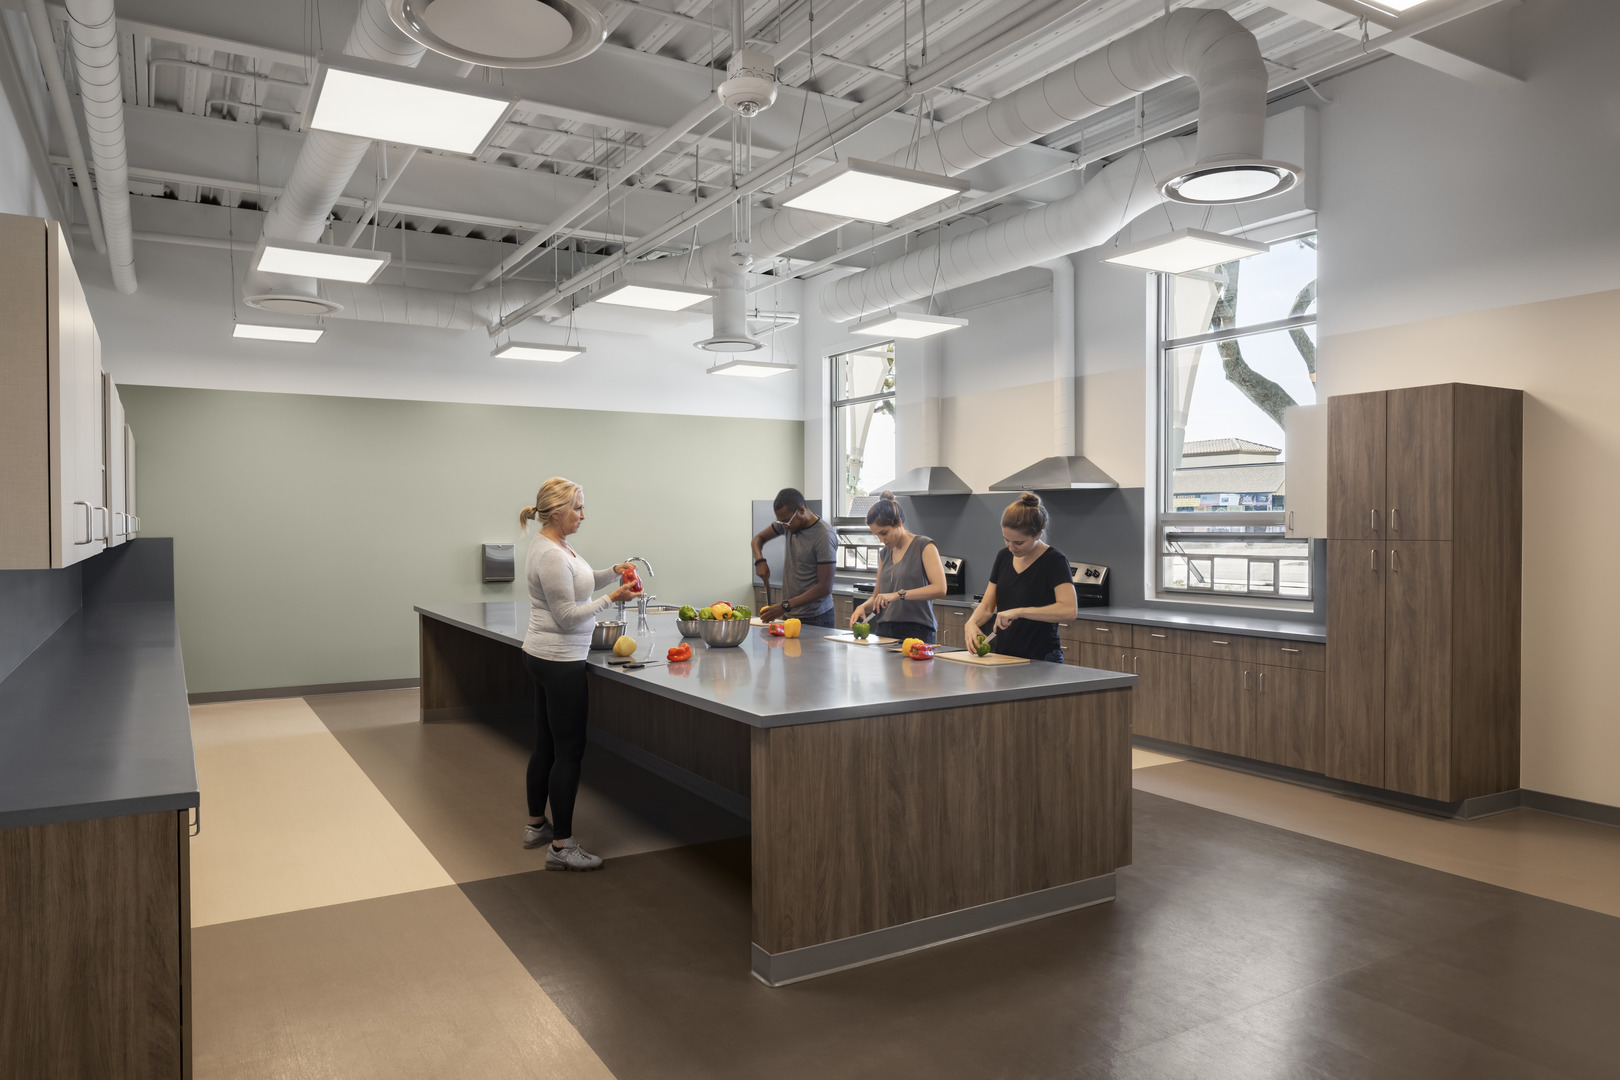 San Diego Live Well Health Center Kitchen Space uses wellness architecture design for its occupants.